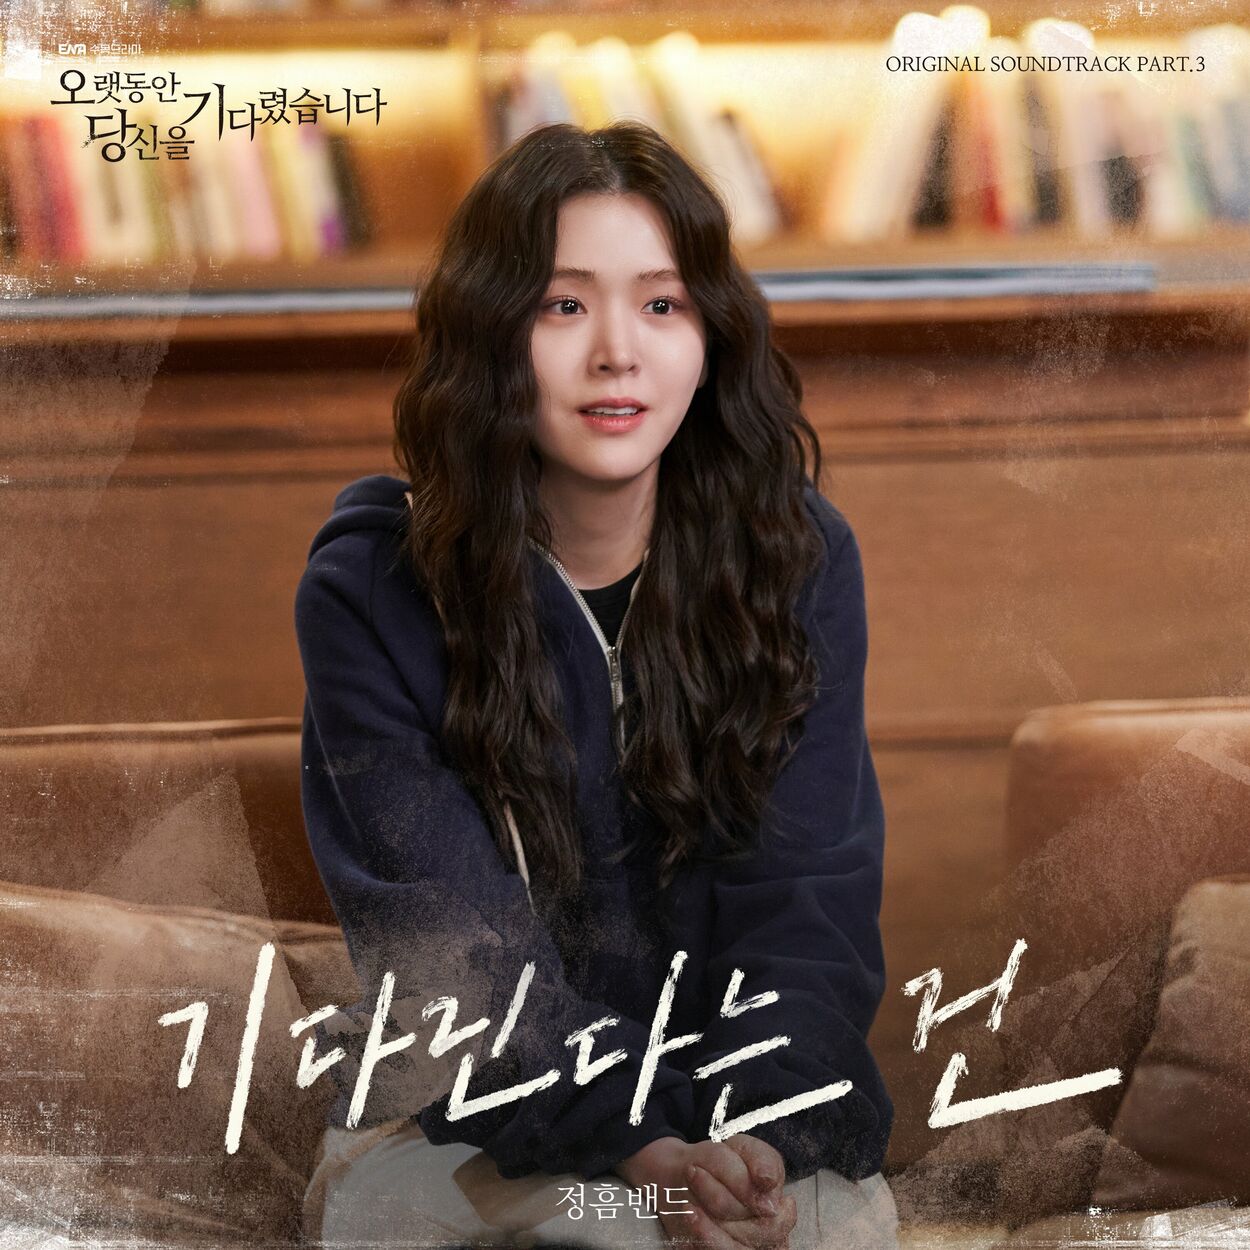 Jungheum Band – Longing for You, Pt. 3 OST